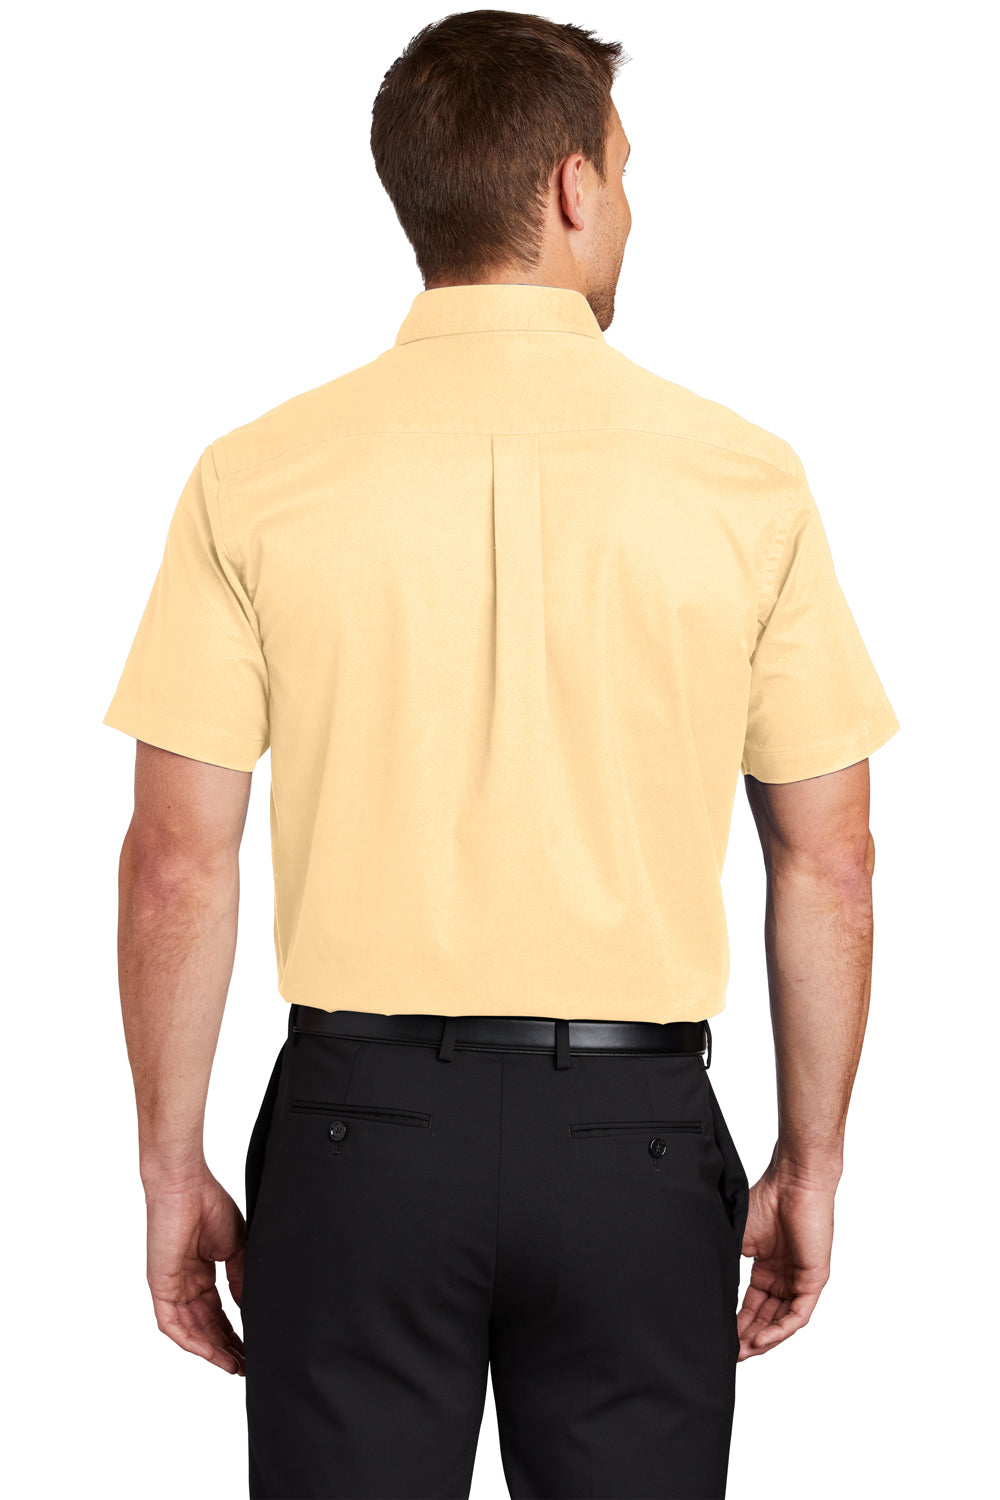 Port Authority S508/TLS508 Mens Easy Care Wrinkle Resistant Short Sleeve Button Down Shirt w/ Pocket Yellow Back